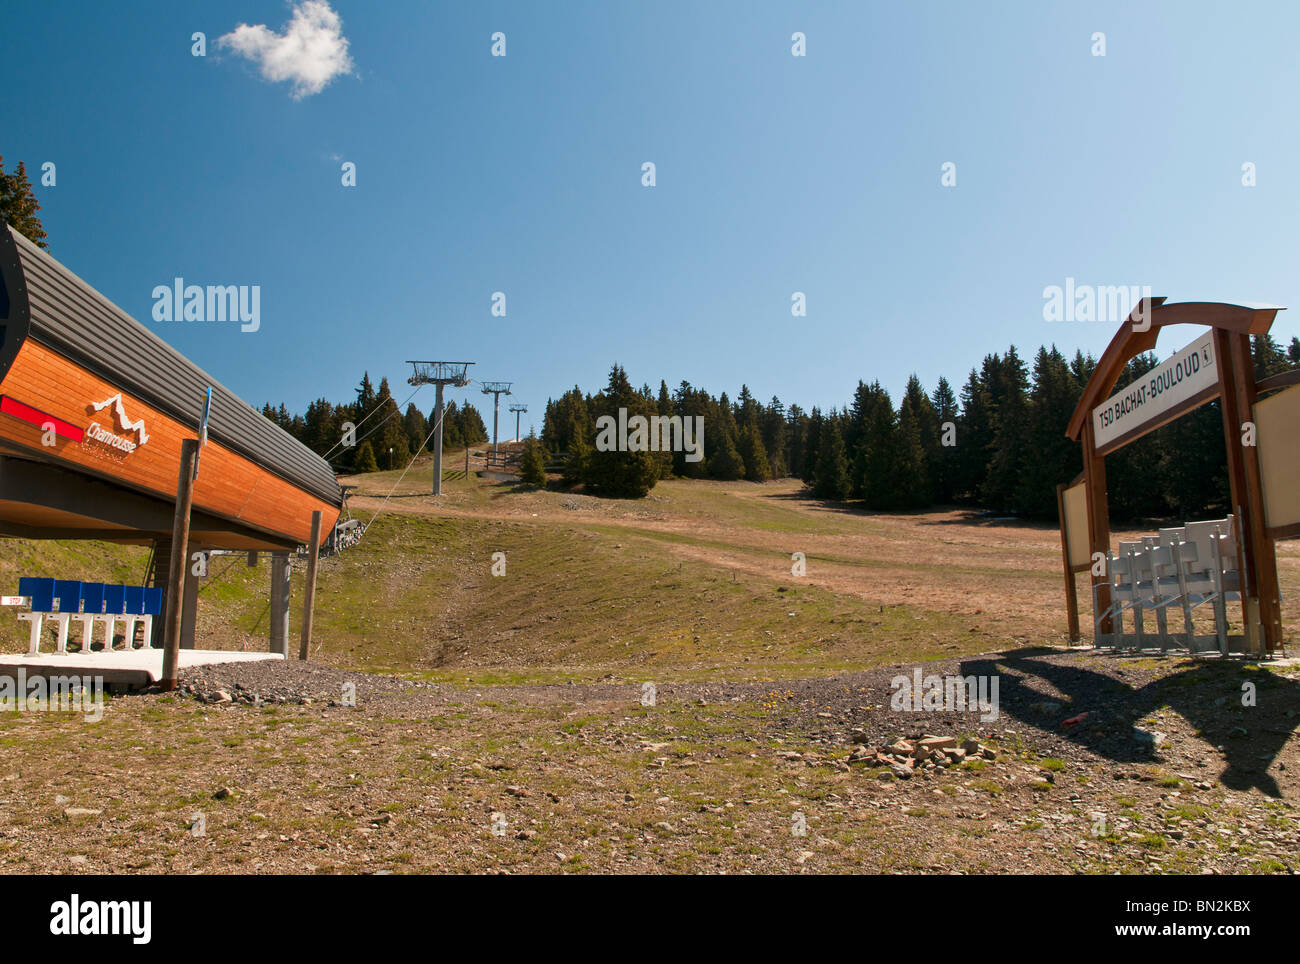 Ski resort in summer, booth tolls at boarding station of a chairlift, Chanrousse, France. Stock Photo